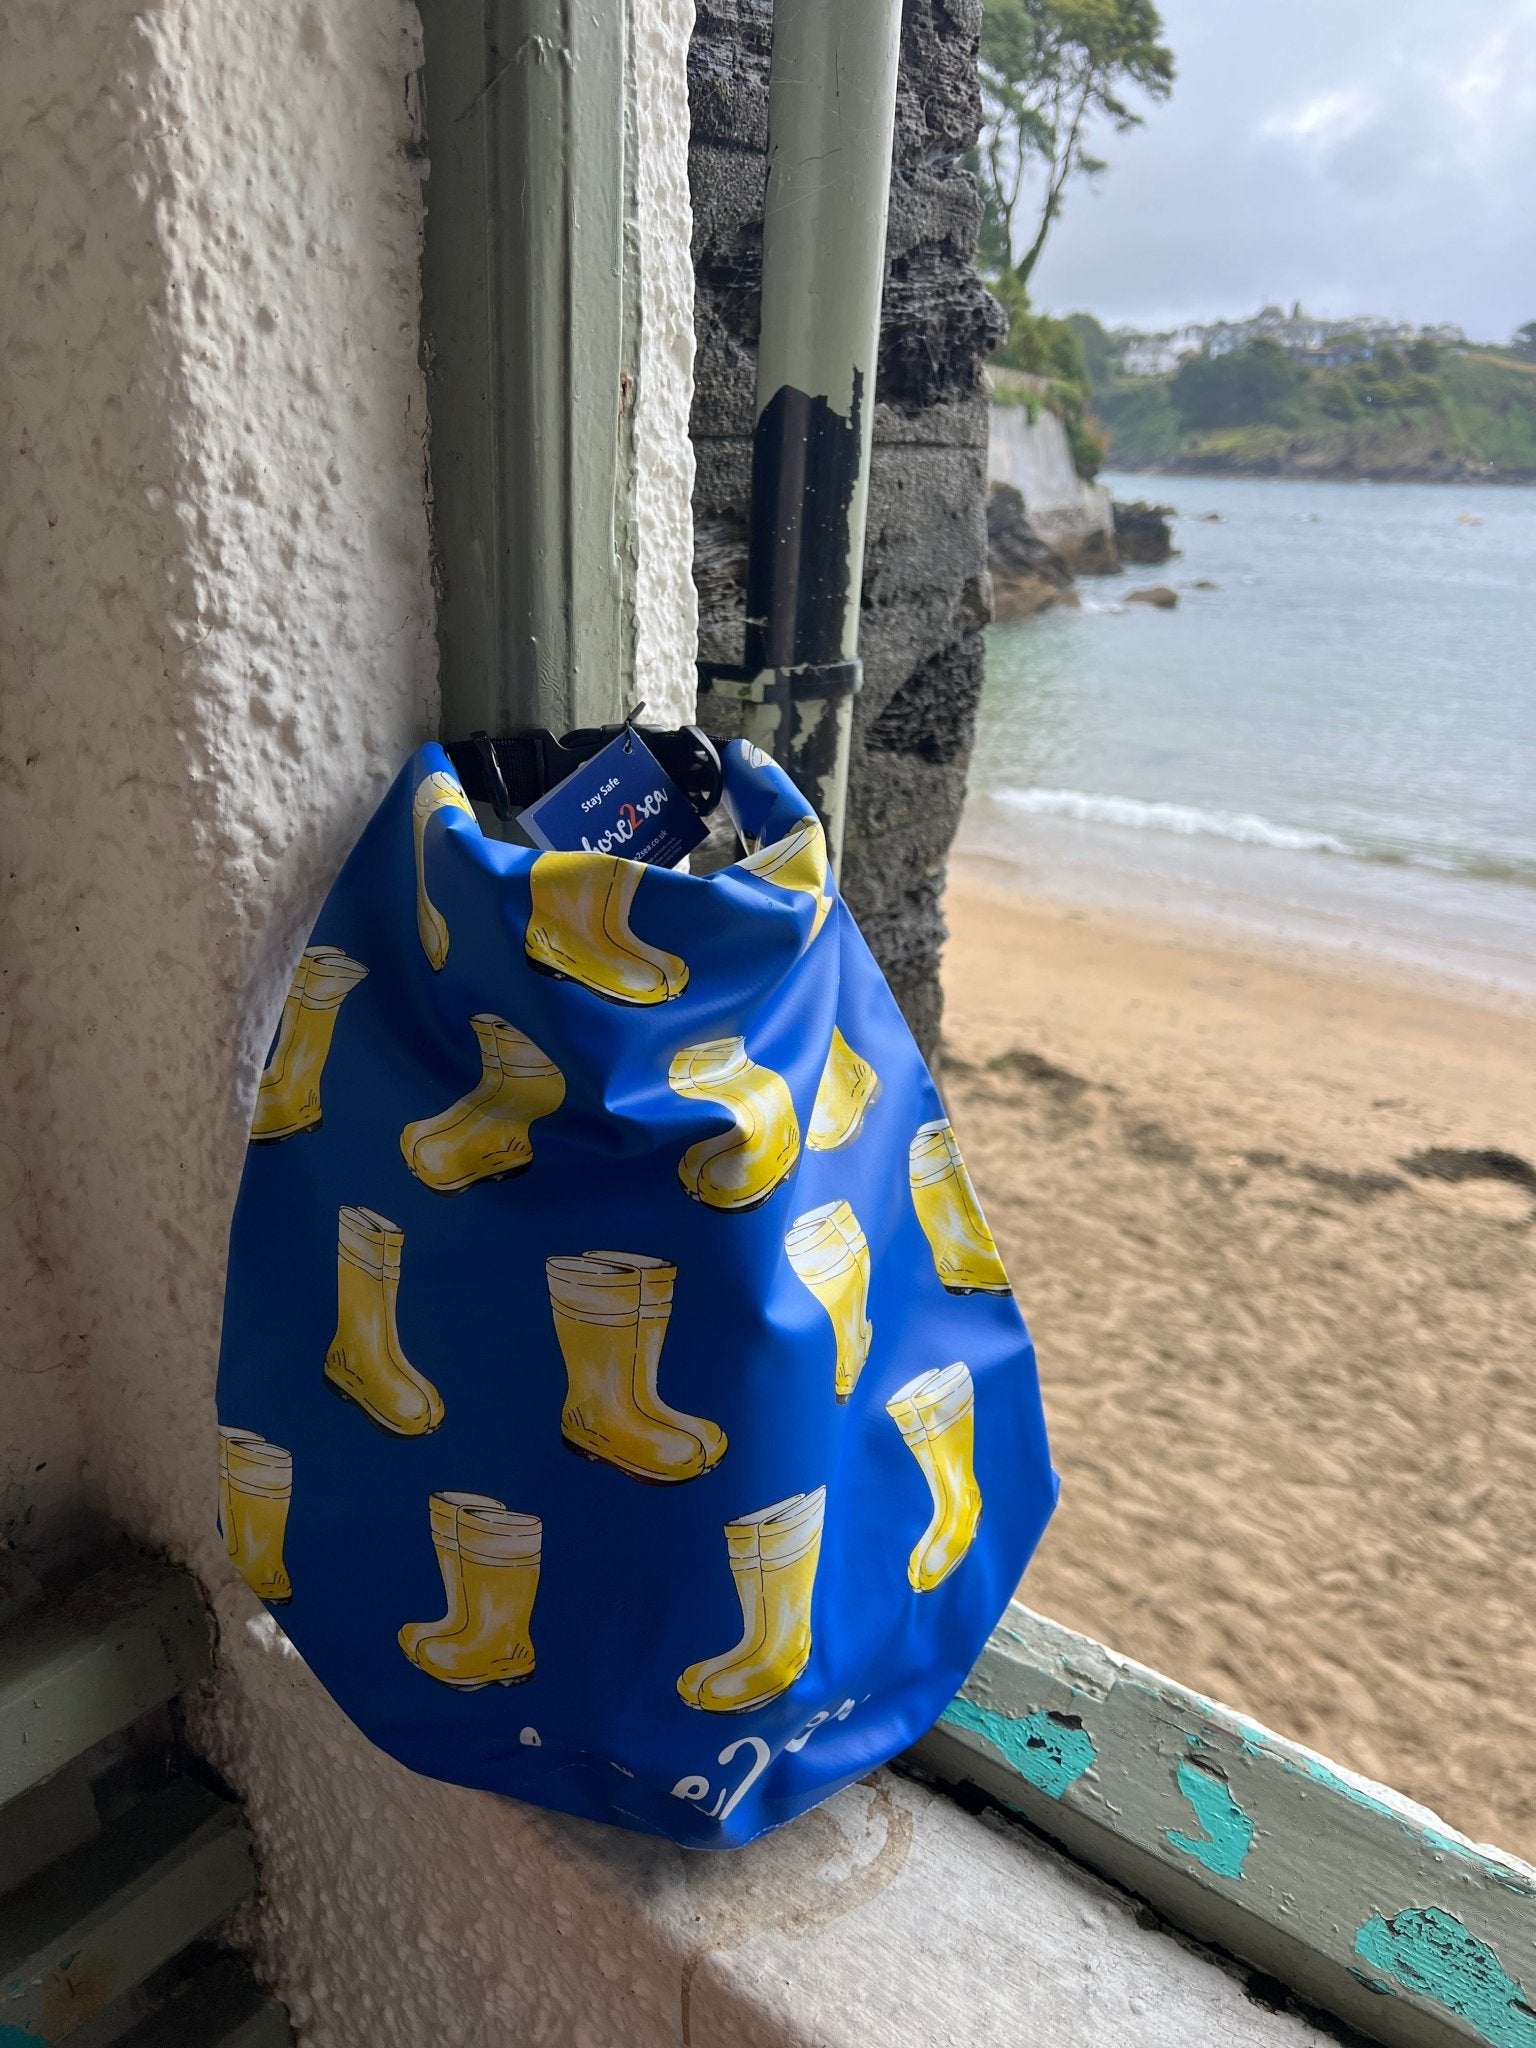 Funky Nautical Patterned Waterproof 15l Drybag: Crab, Lobster, Seagull, Puffins, Fish, RNLI Wellies - Readymoney Beach Shop